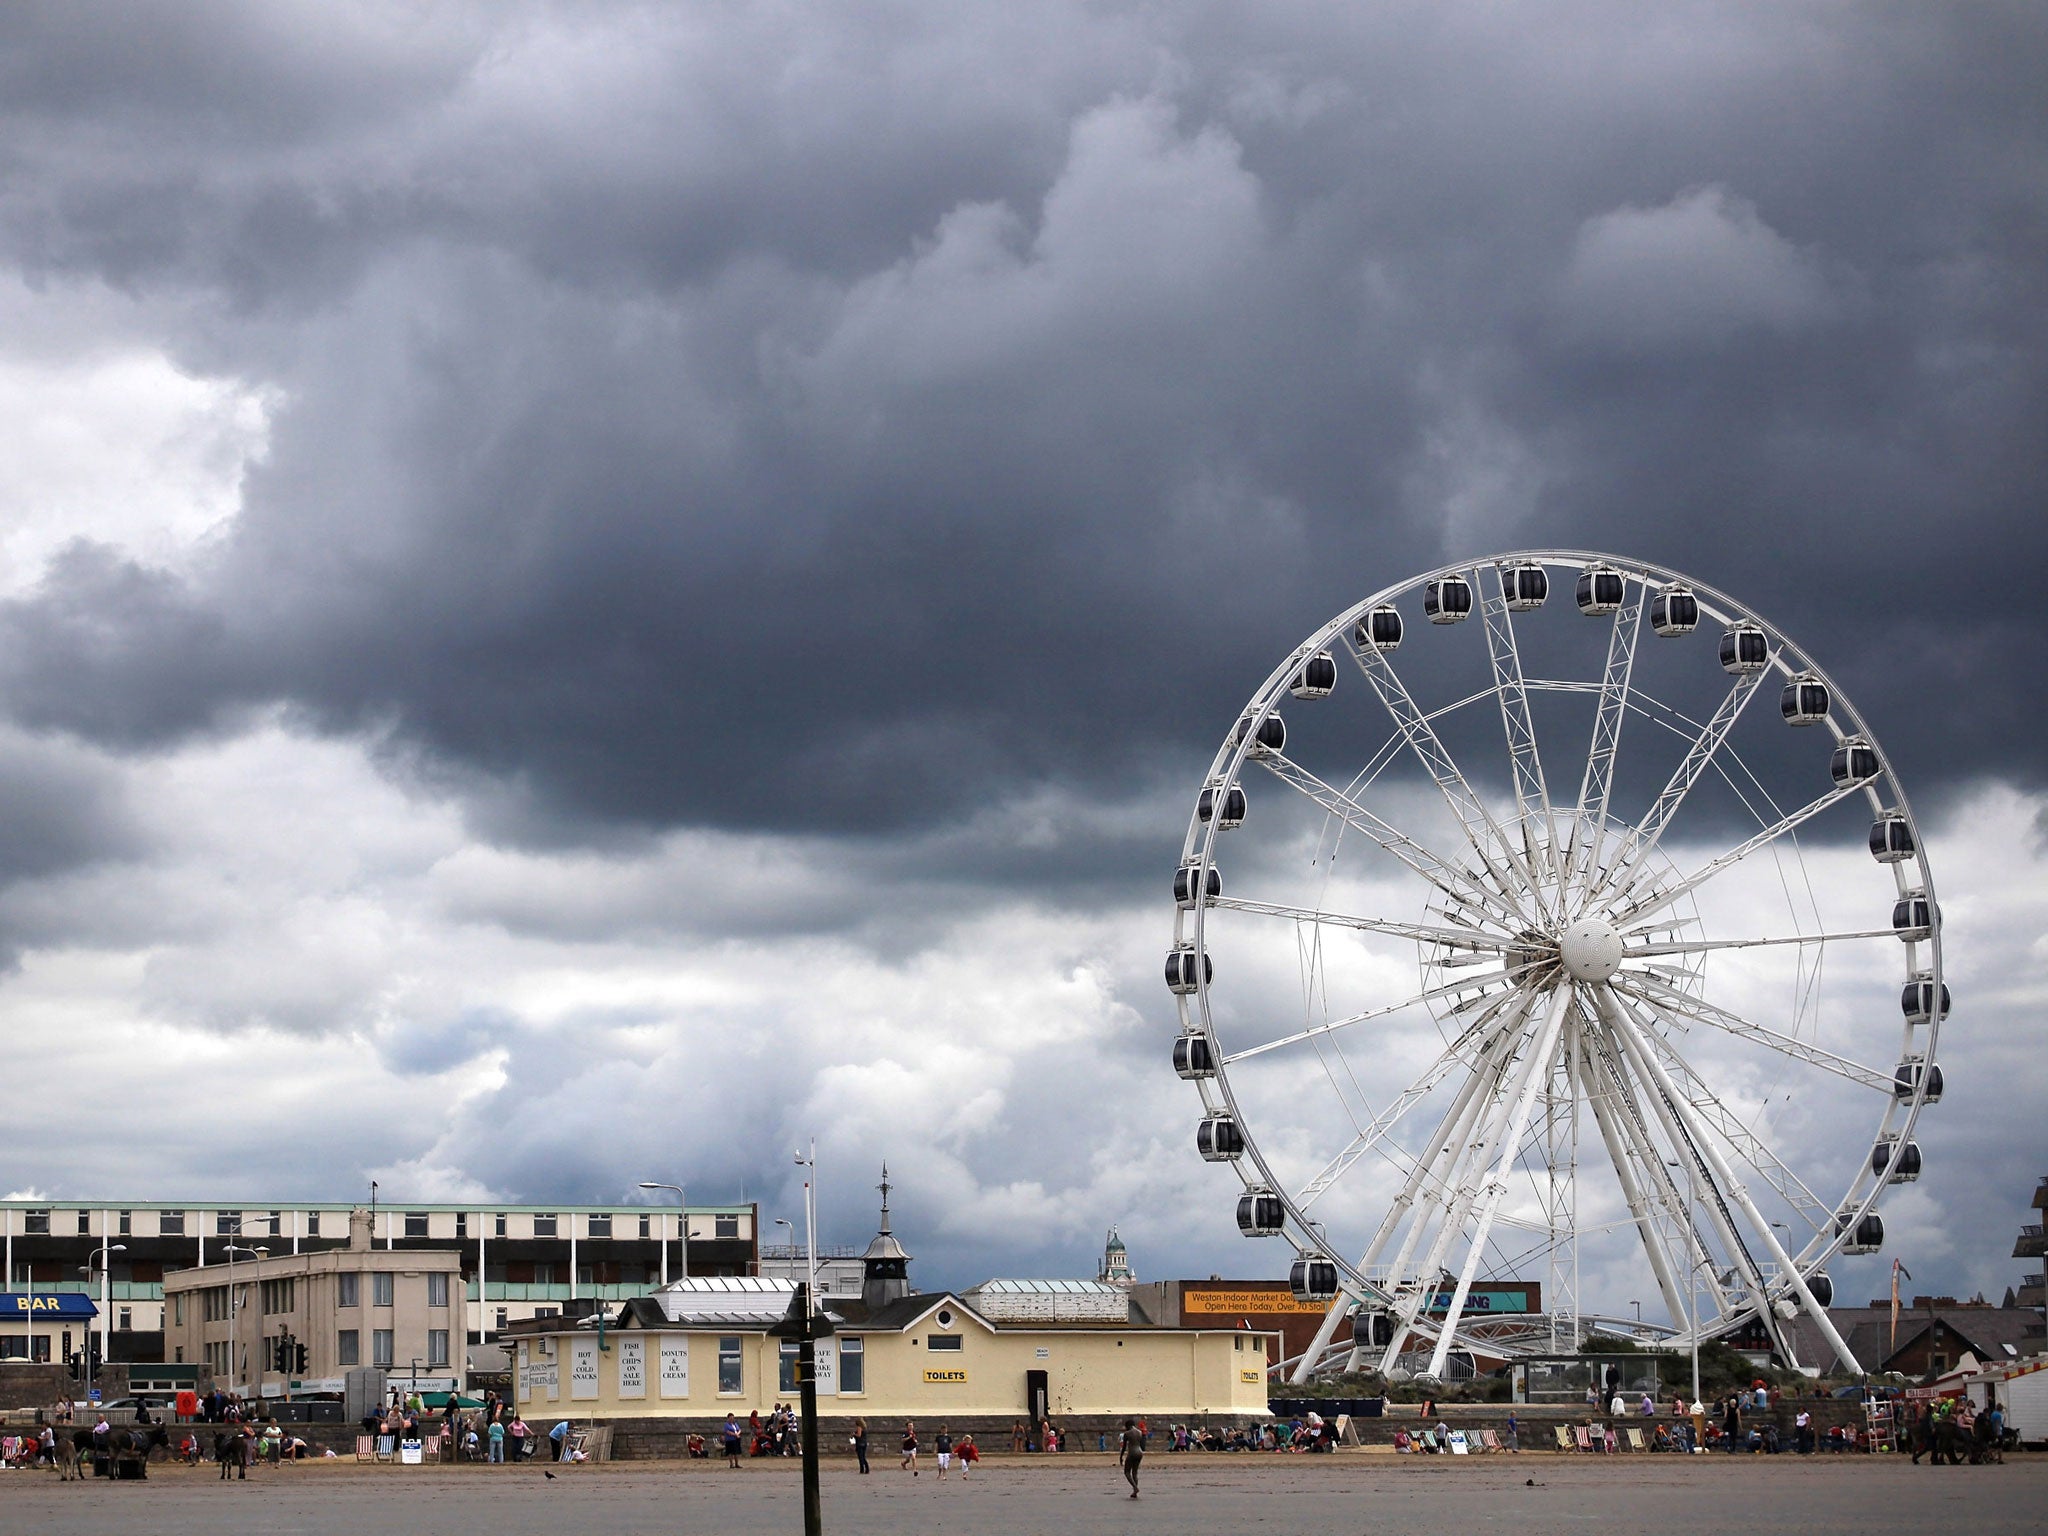 Rain clouds gather above the big wheel on the seafront on August 30, 2011 in Weston-Super-Mare, England.